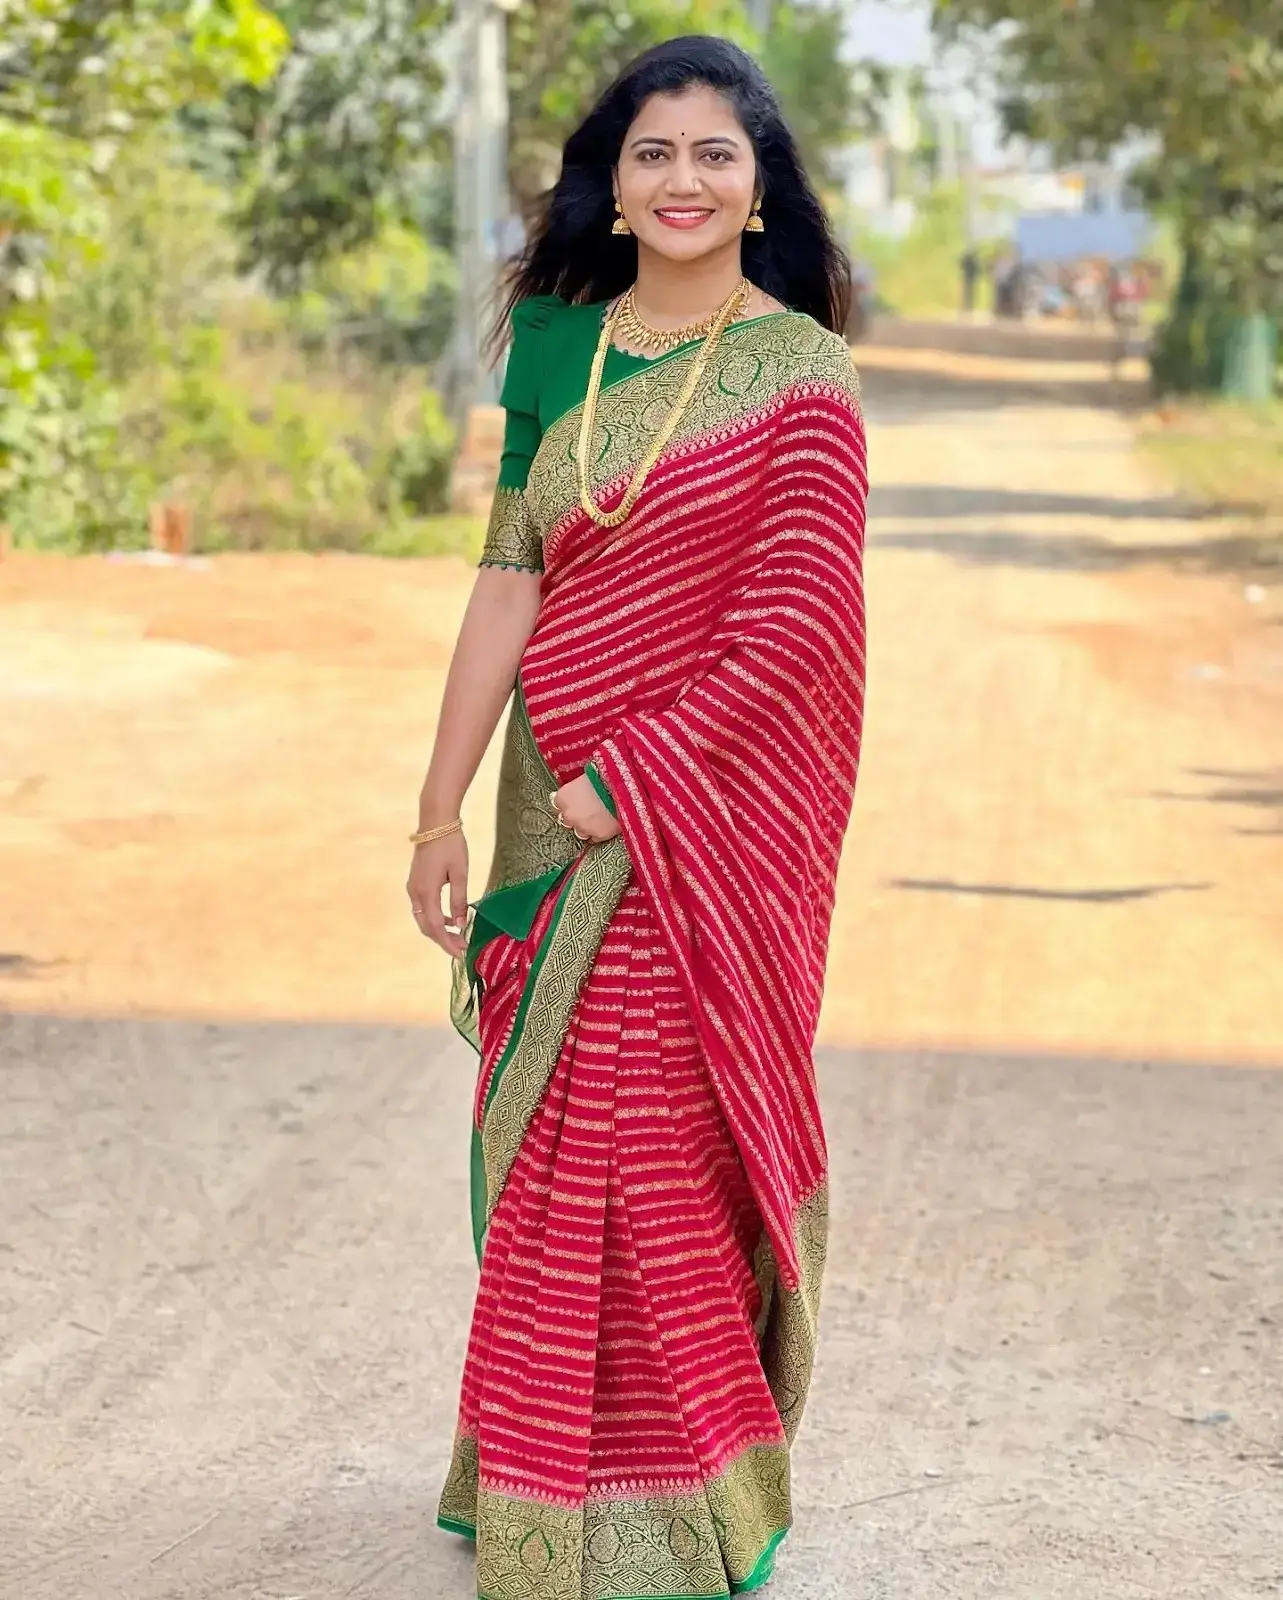 INDIAN TV ACTRESS SHIVA JYOTHI IMAGES IN TRADITIONAL RED SAREE 2